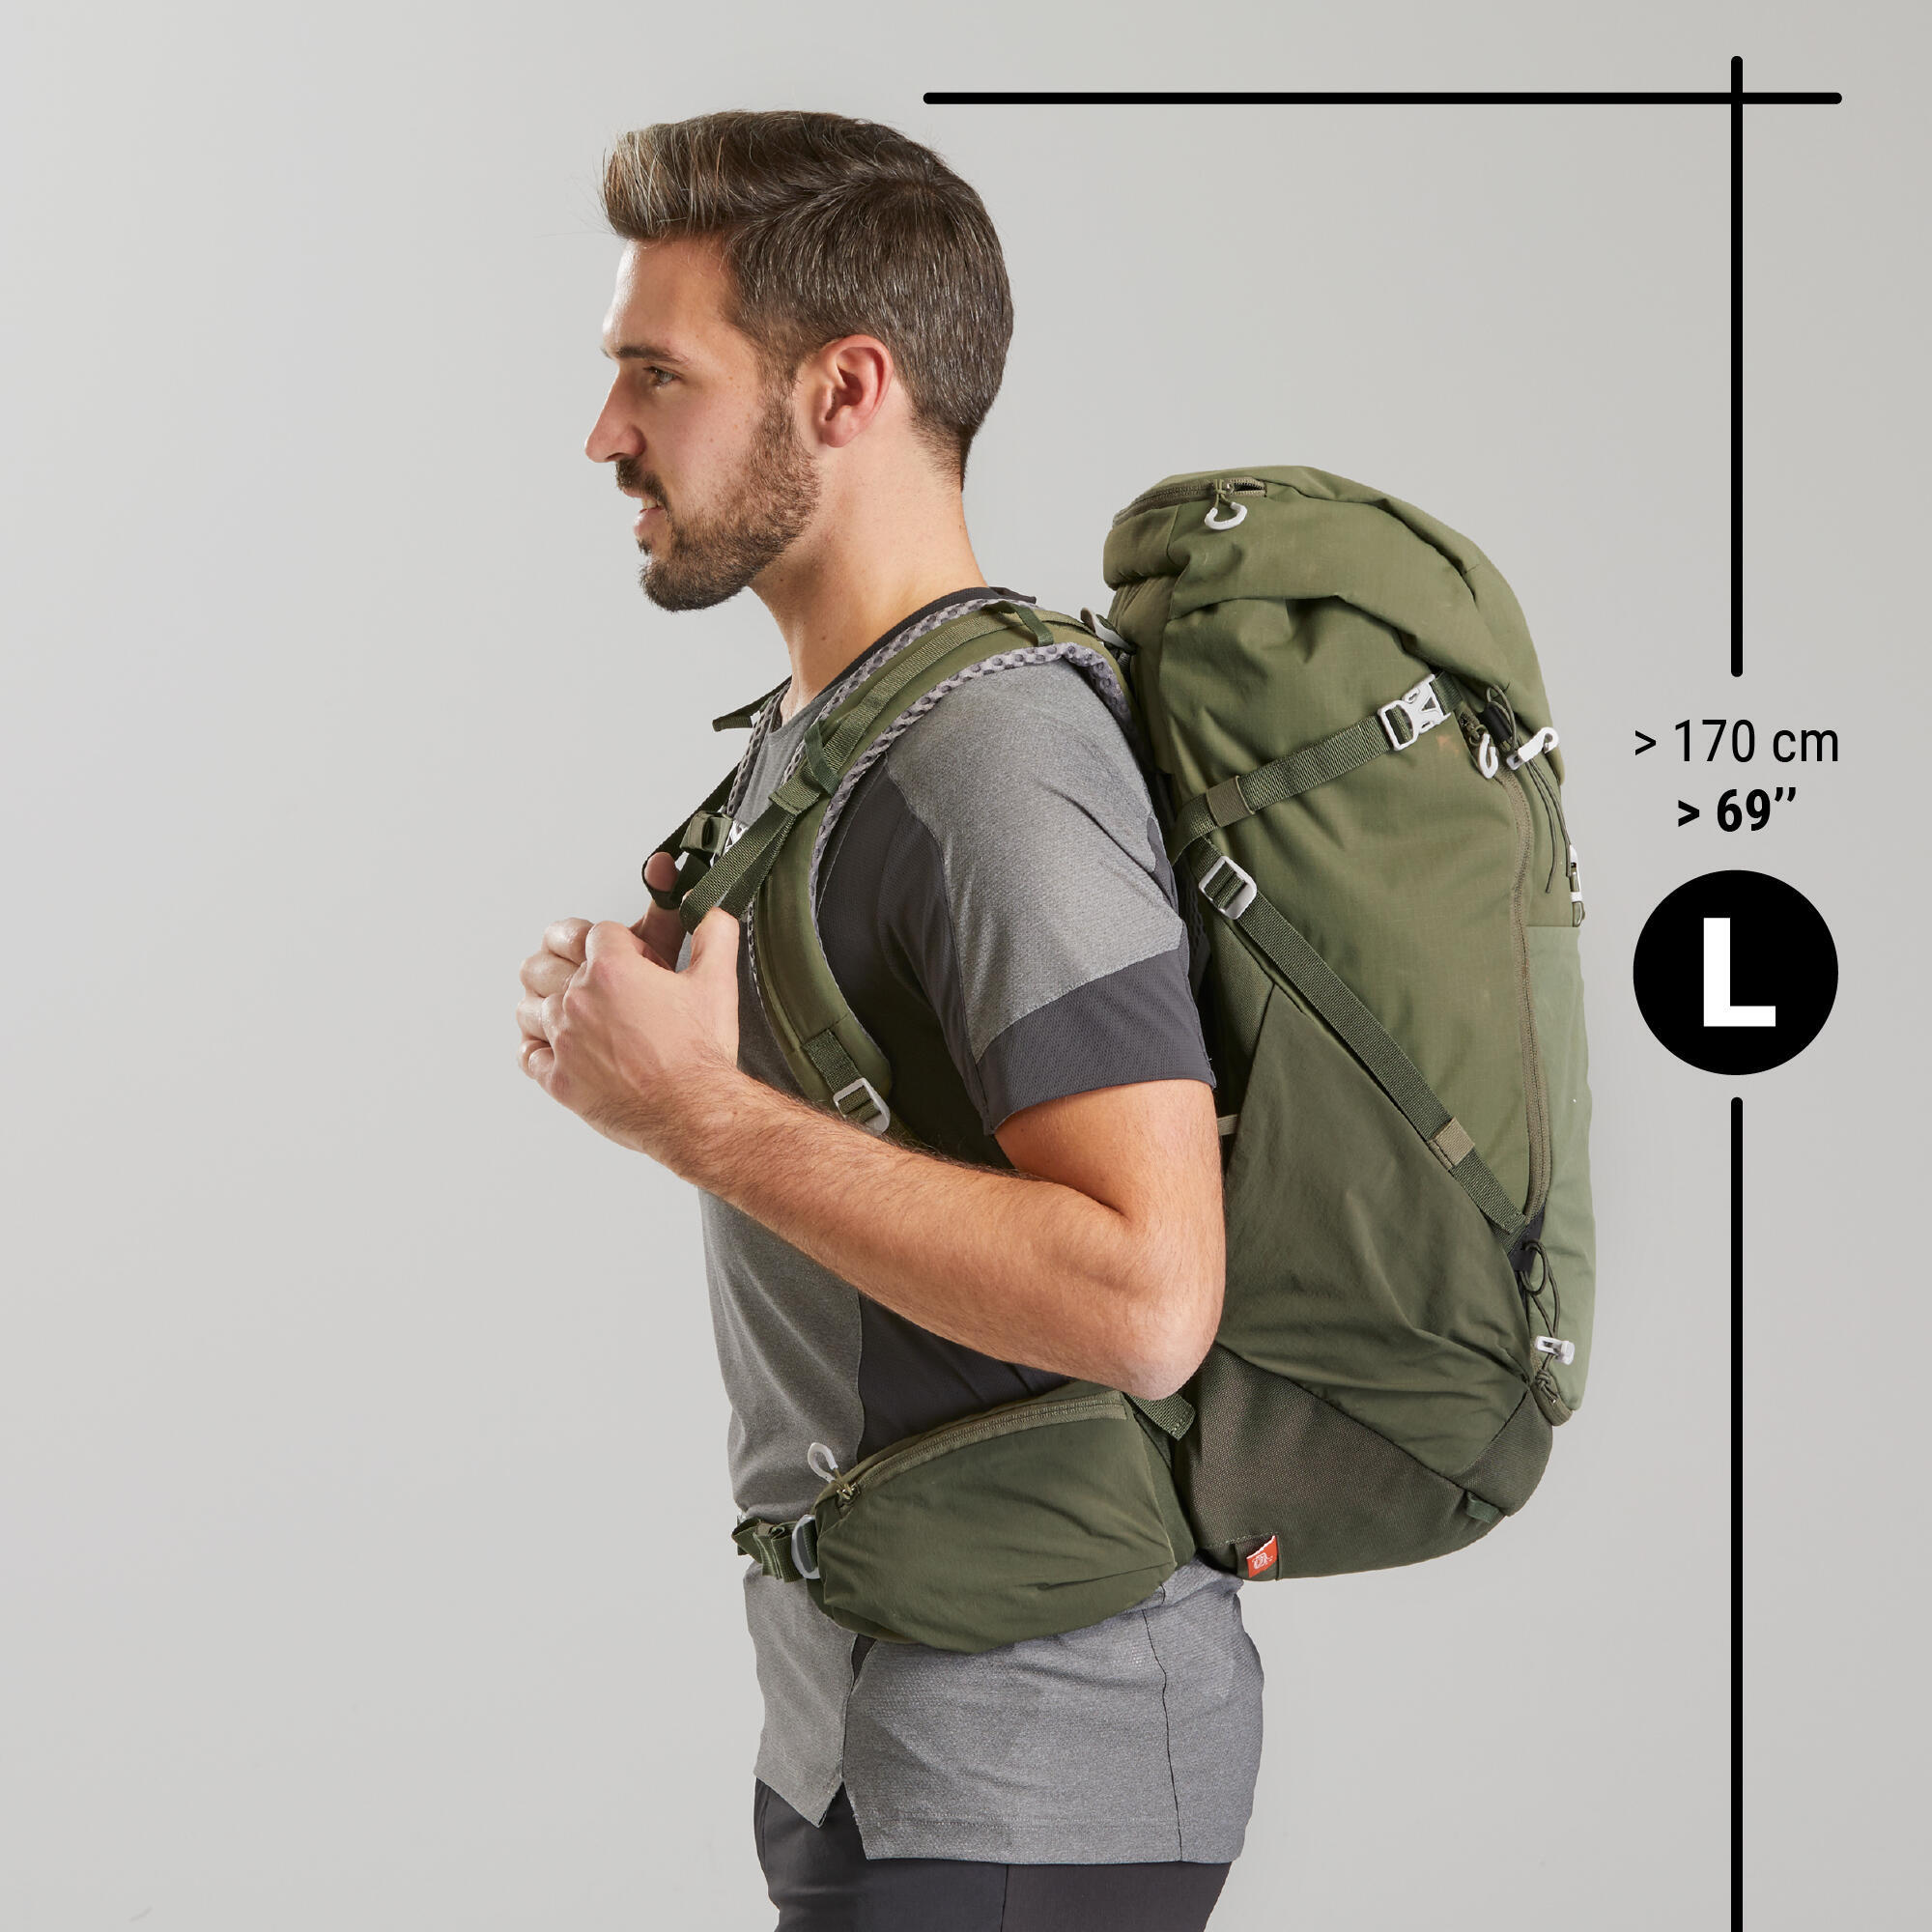 Mountain hiking backpack 40L - MH500 6/13